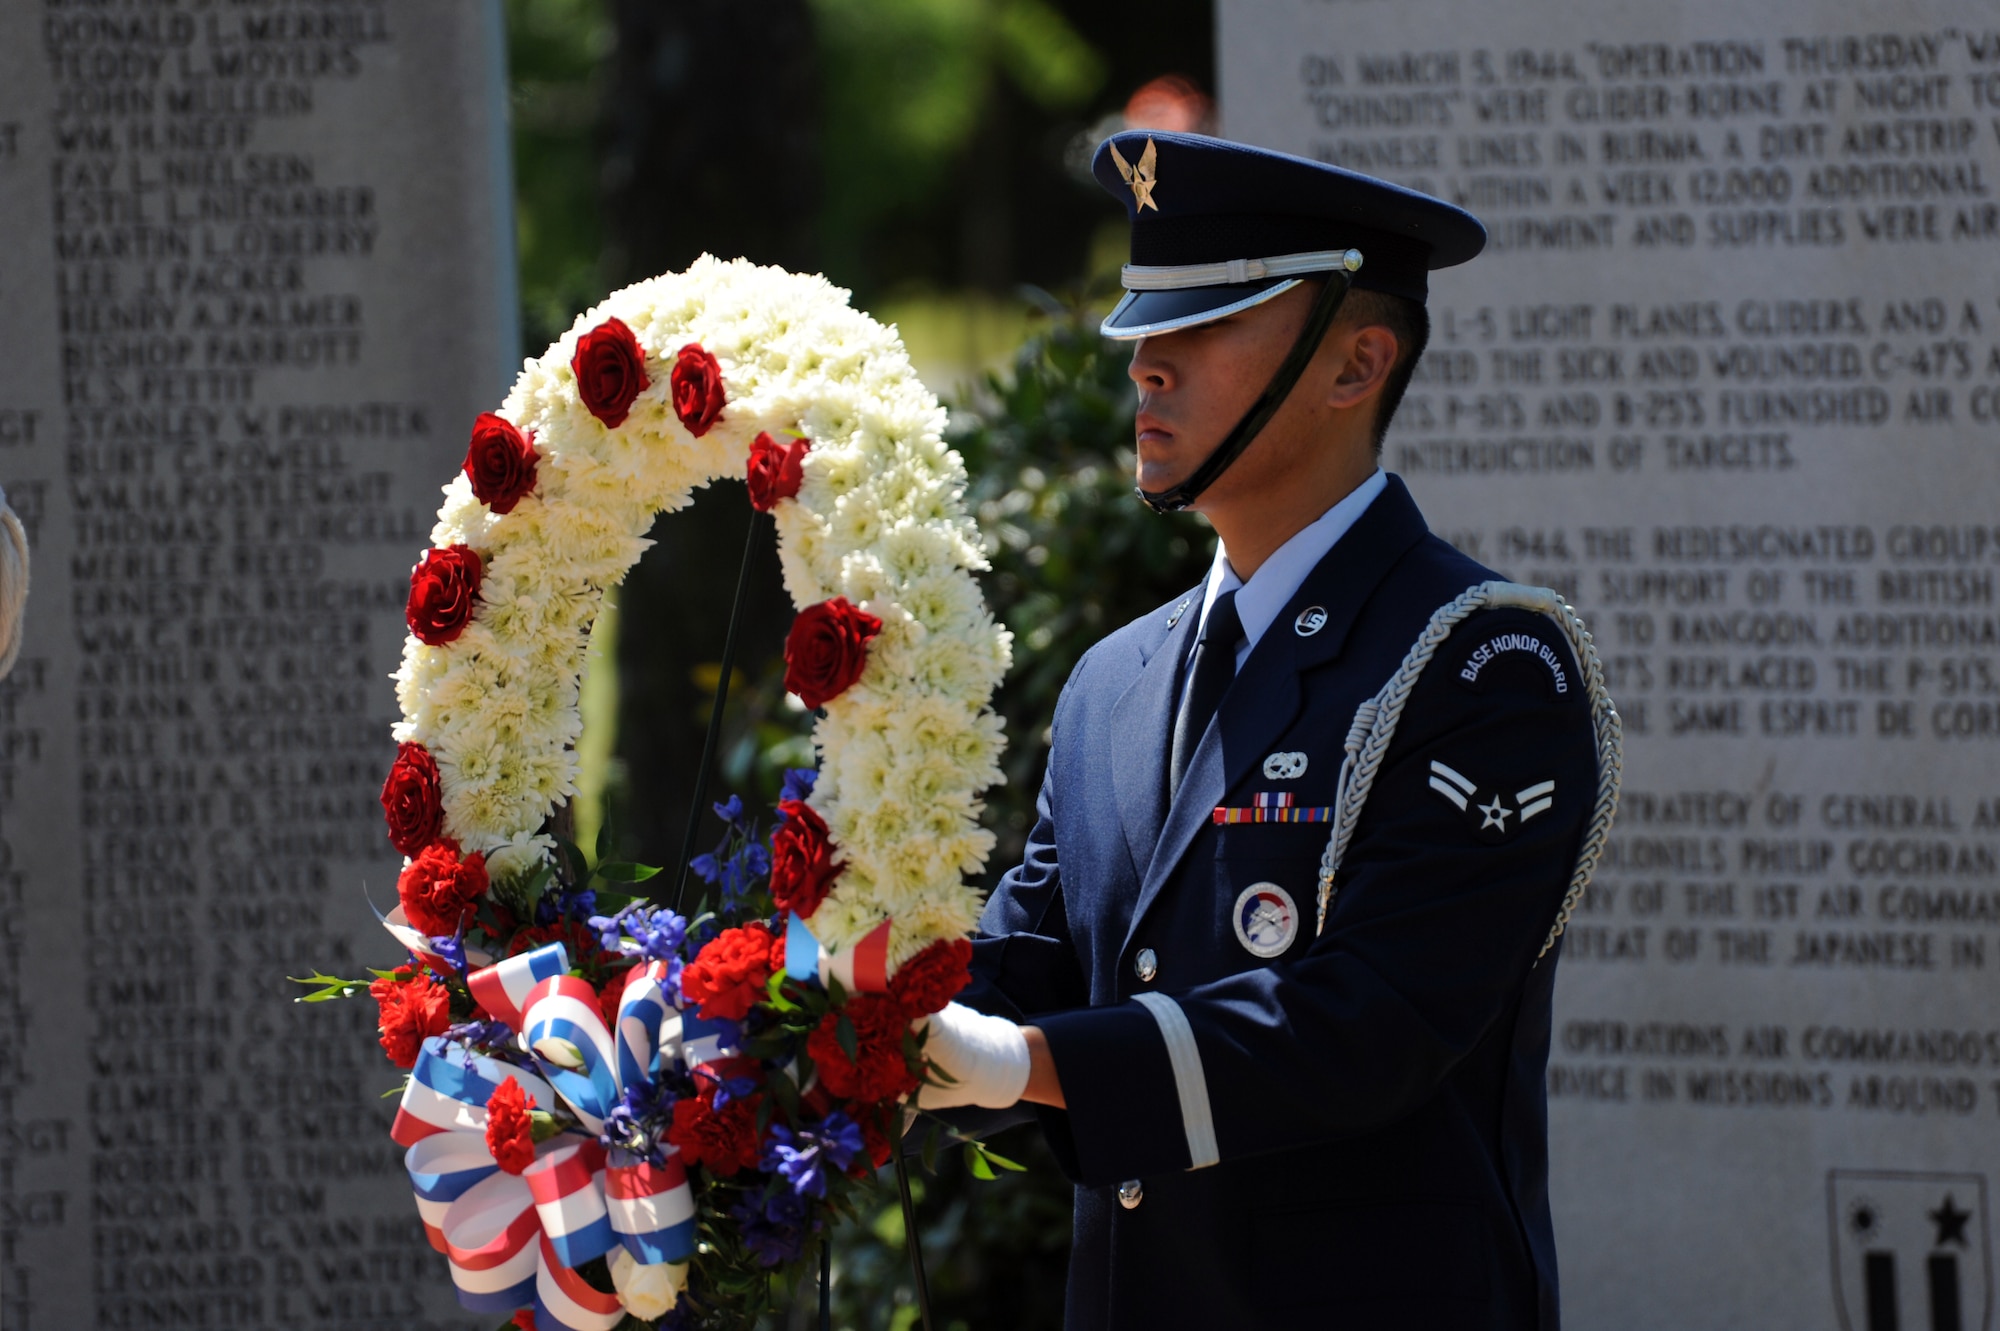 An Airman assigned to the Hurlburt Field Honor Guard team presents a wreath during a ceremony honoring the 30th anniversary of Operation Eagle Claw April 29. Operation Eagle Claw, conducted April 24, 1980, was a complex mission to rescue U.S. citizens taken hostage in the U.S. embassy in Iran.  Tragically, the attempt ended in the death of eight service members, including five from Hurlburt Field’s 1st Special Operations Wing. (DoD photo by U.S. Air Force Senior Airman Matthew Loken)